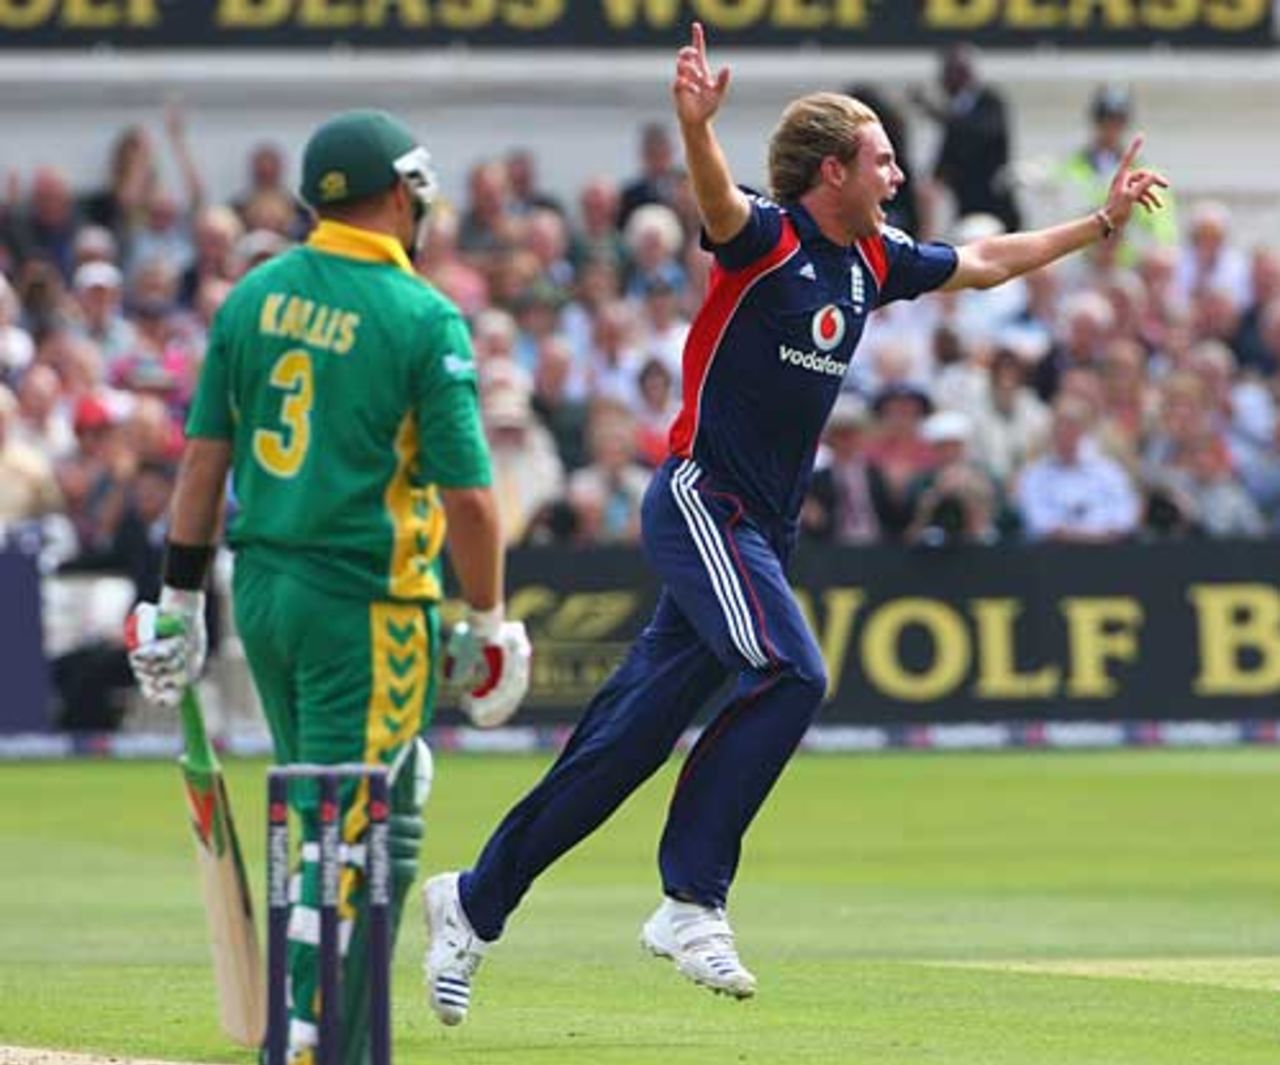 Stuart Broad bags another as Jacques Kallis edges to slip, England v South Africa, 2nd ODI, Trent Bridge, August 26, 2008